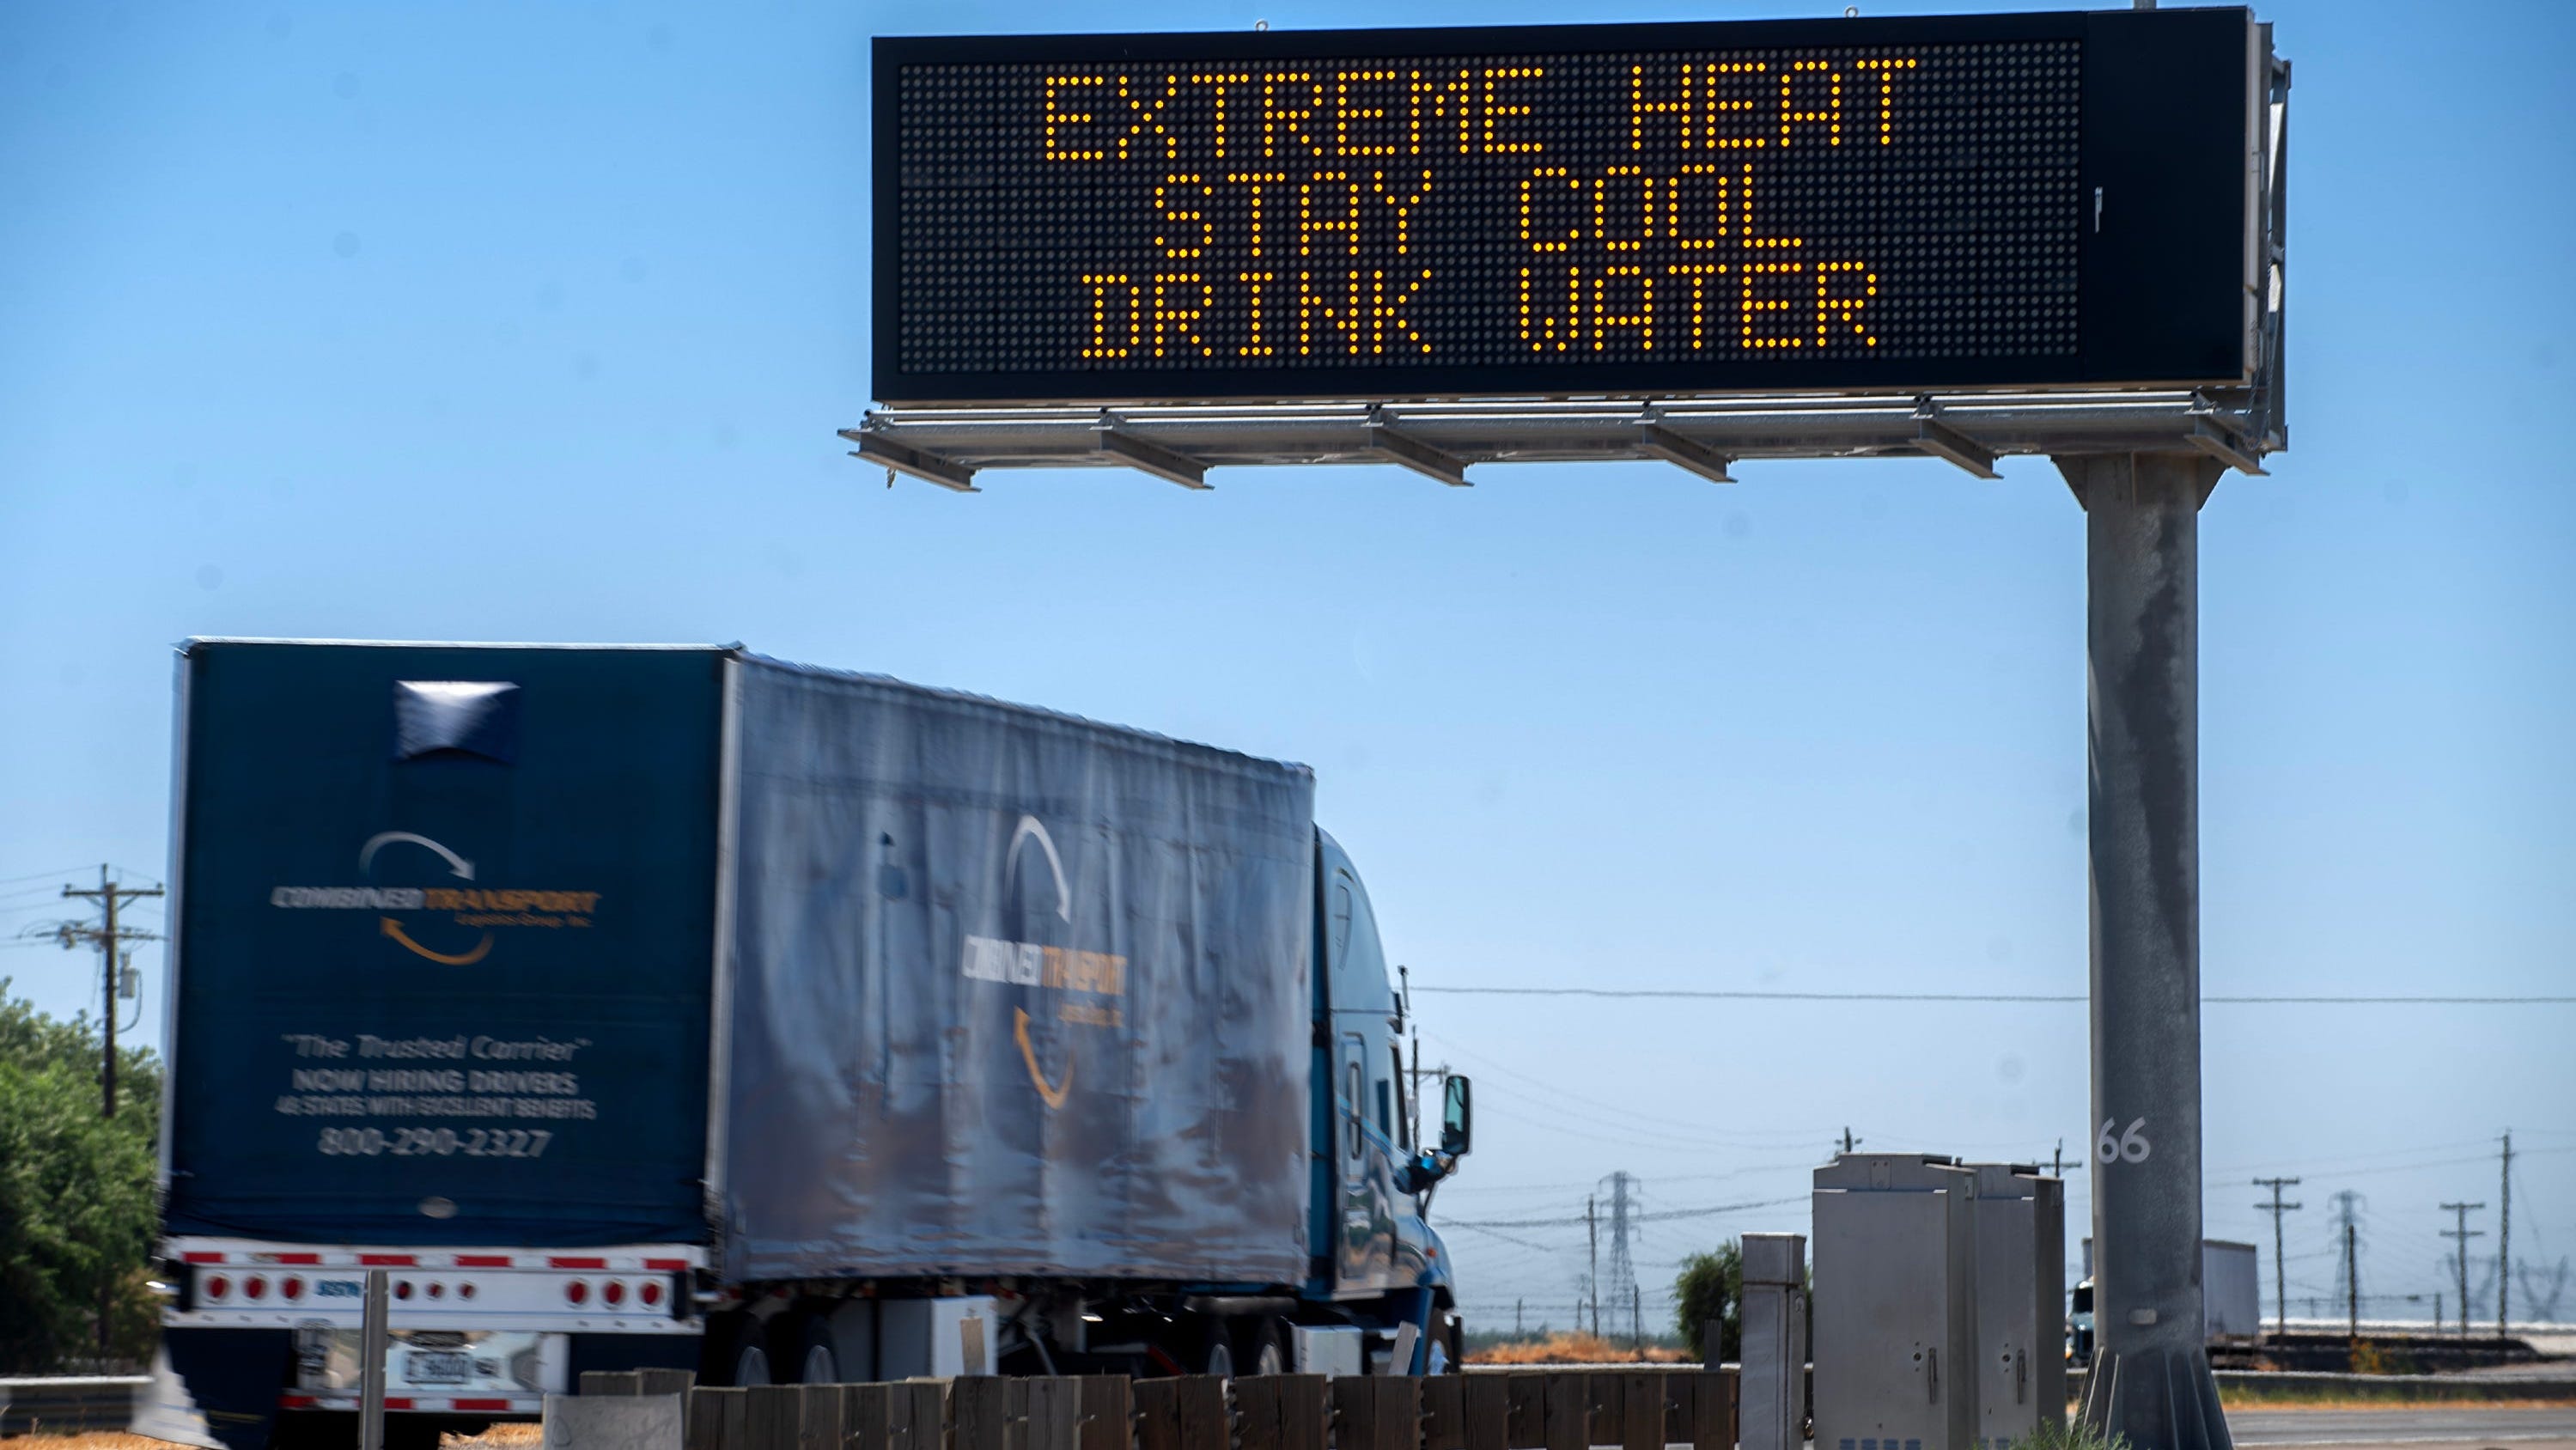 California's Death Valley may break world heat record with 130 degrees